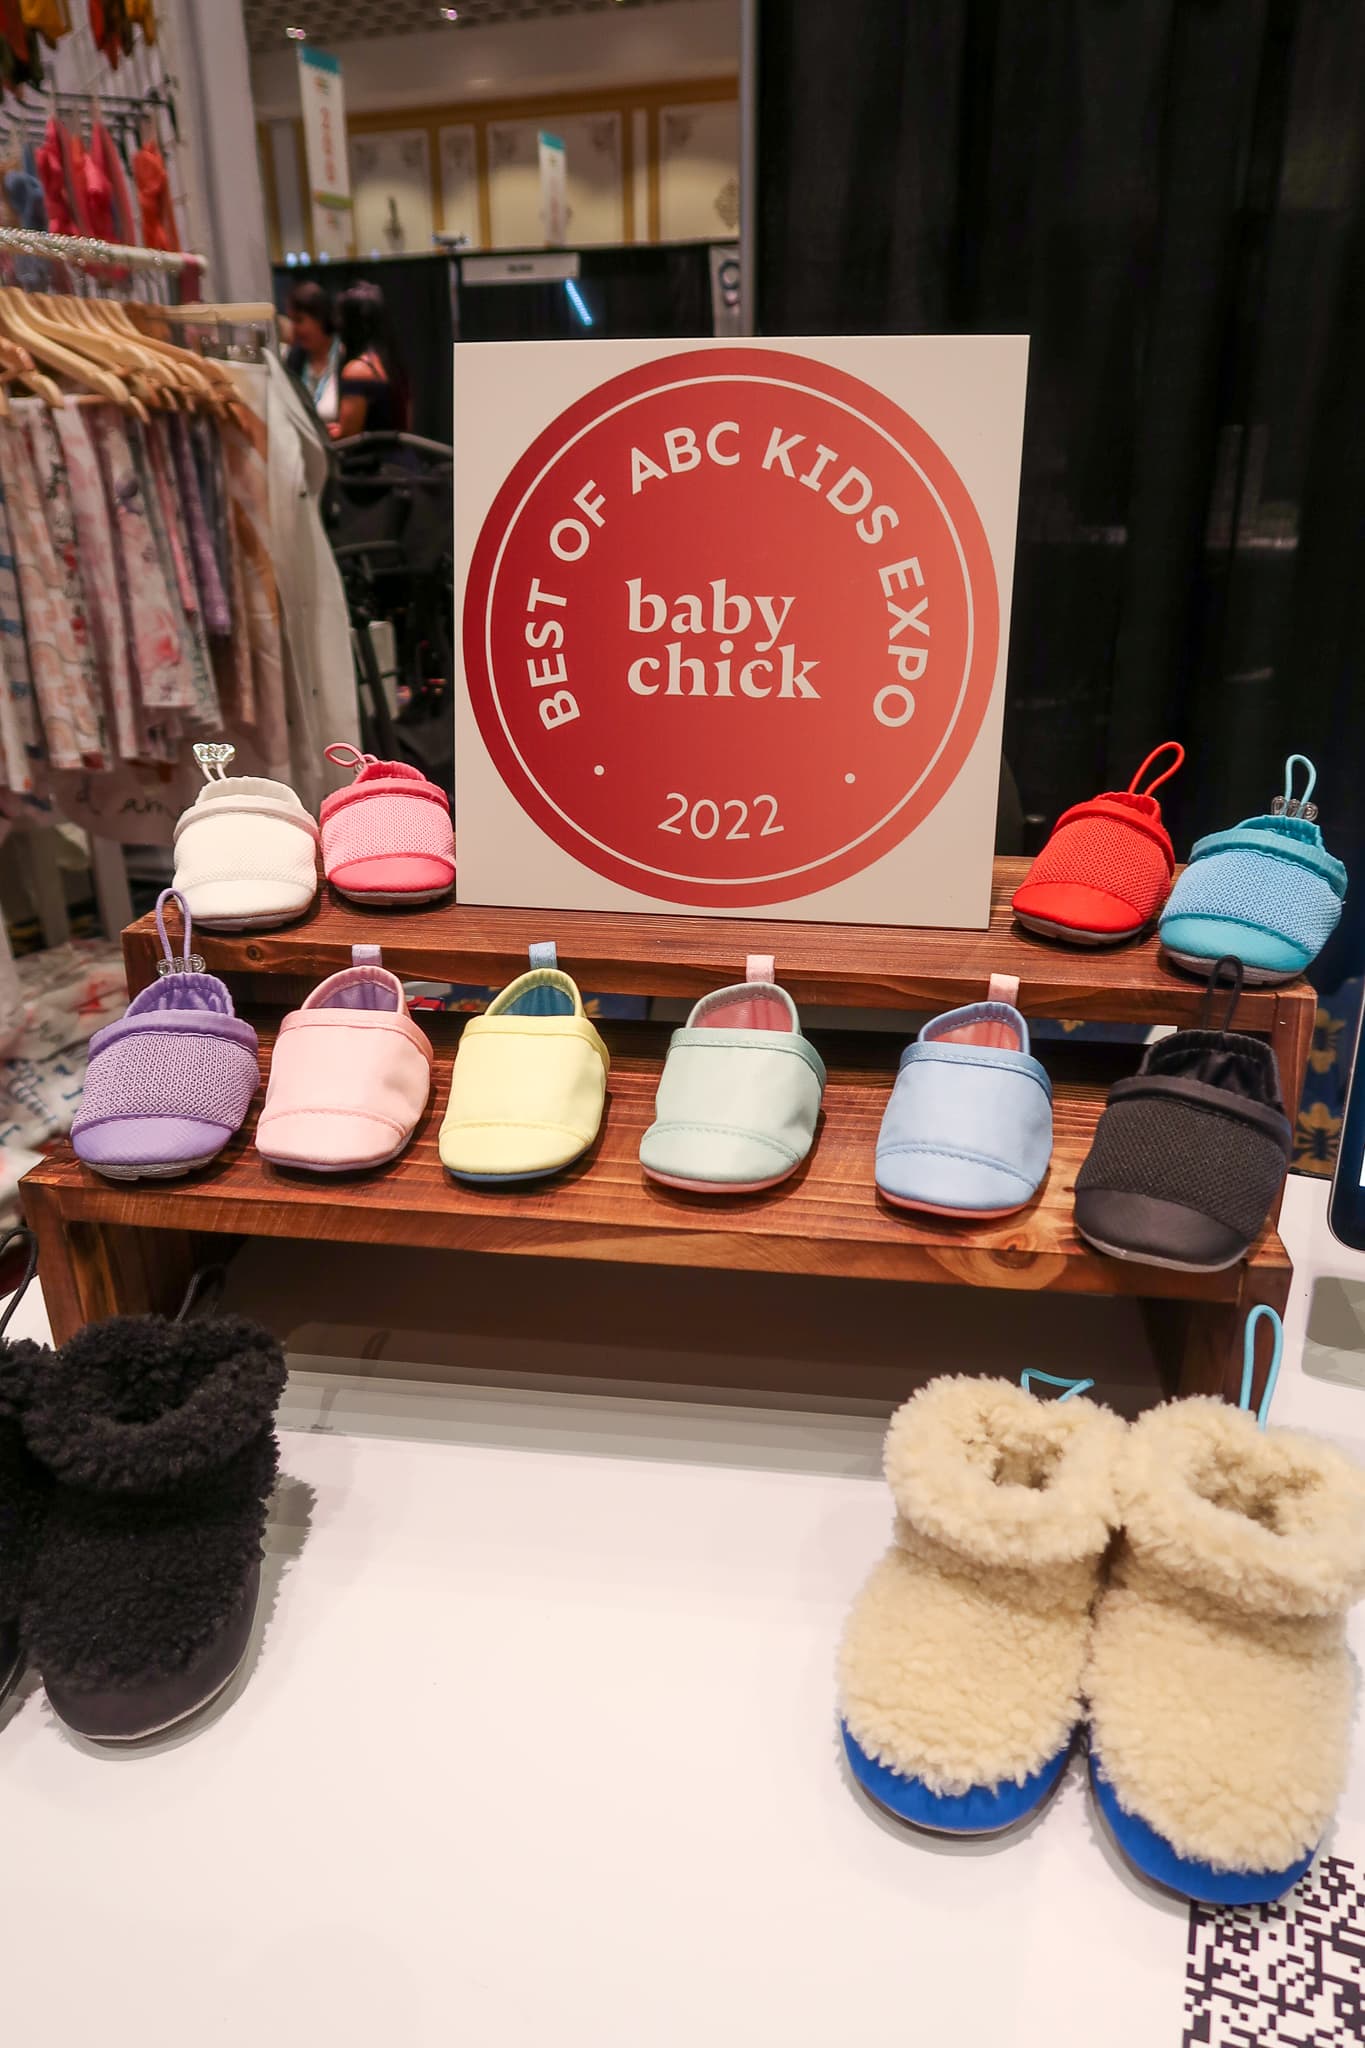 Best Baby Products of ABC Kids Expo 2022